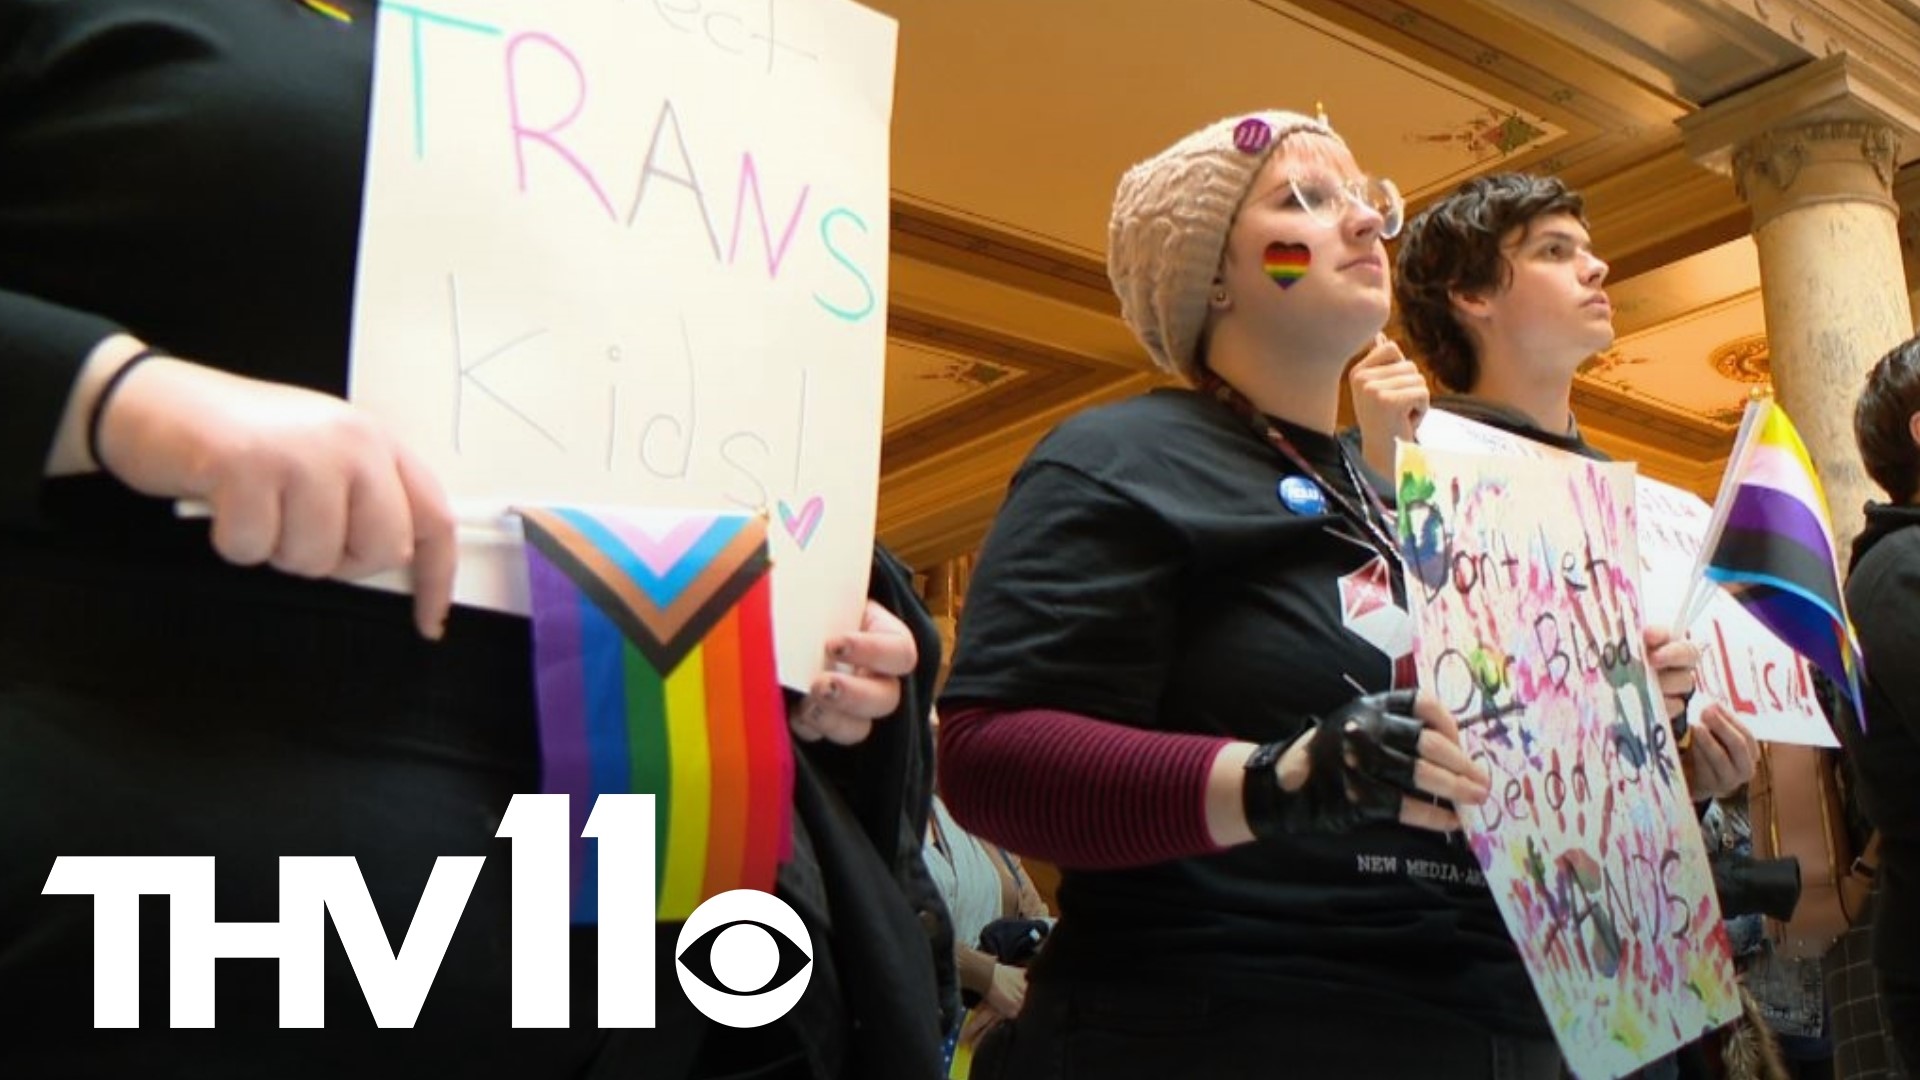 Gov. Sanders signed a law making it easier to sue doctors that provide kids transgender care for medical malpractice. Those impacted by the law still have questions.